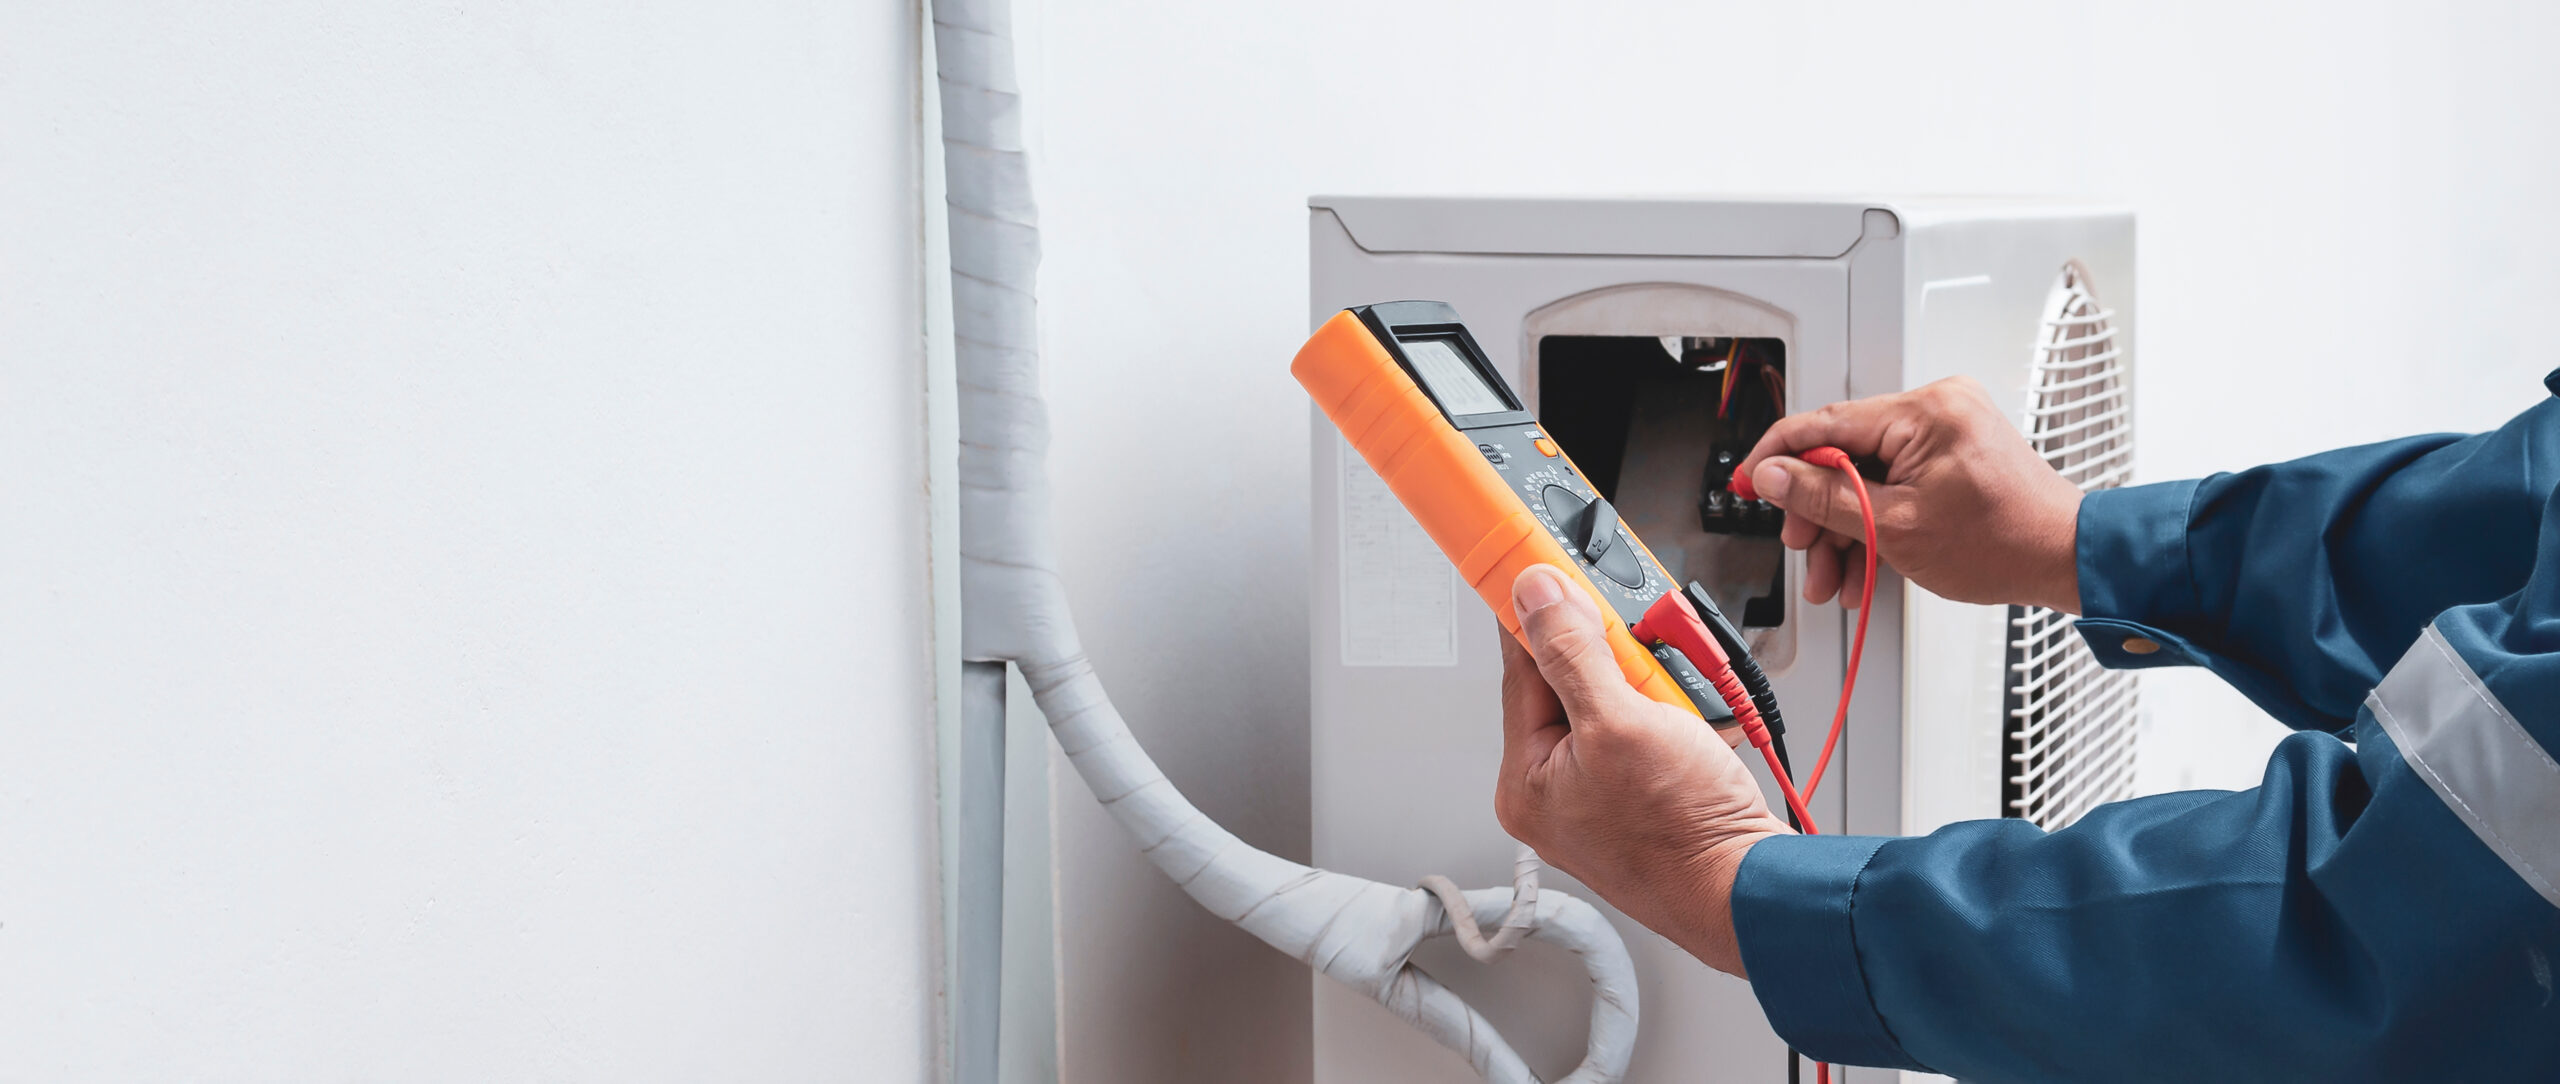 Repairman holding multimeter to check air conditioner system